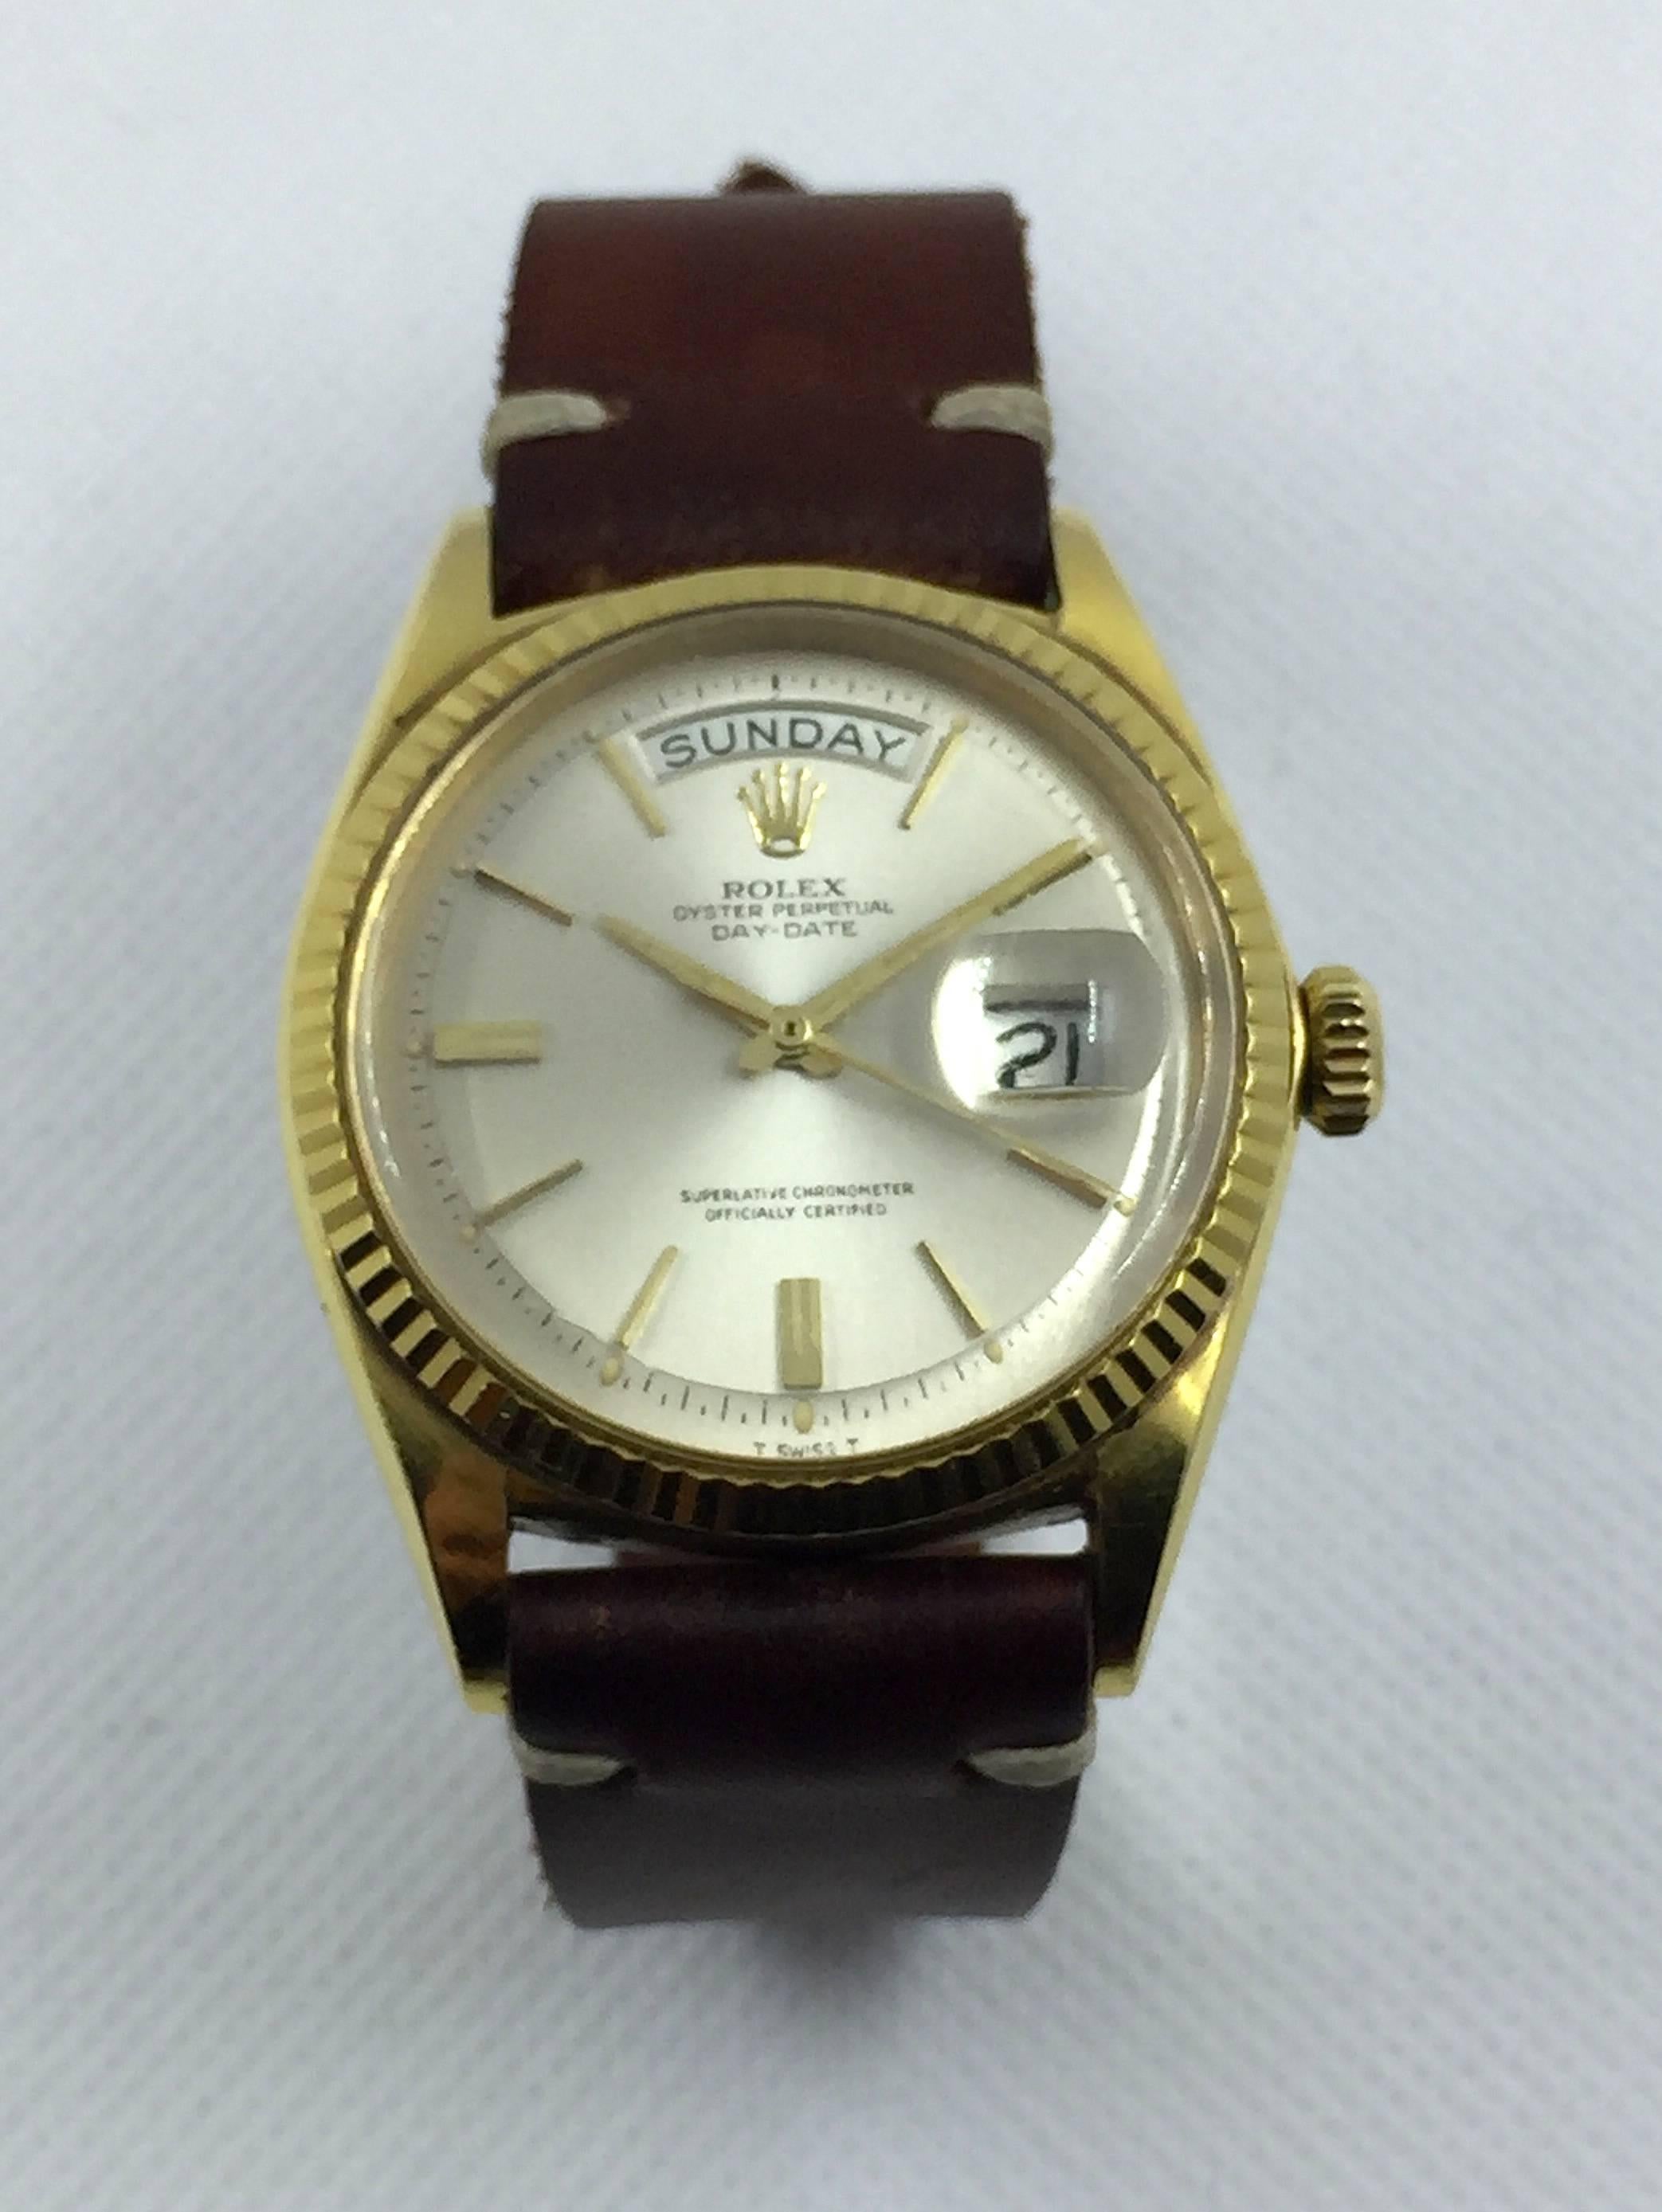 Rolex 18K Yellow Gold Oyster Perpetual Day-Date Wristwatch
Factory Silvered Pie-Pan Dial with Door-Step Markers at Six and Nine
Yellow Gold Fluted Bezel
36mm in size 
Day and Date Functions
Rolex Calibre Base 1500 Automatic Movement
Acrylic